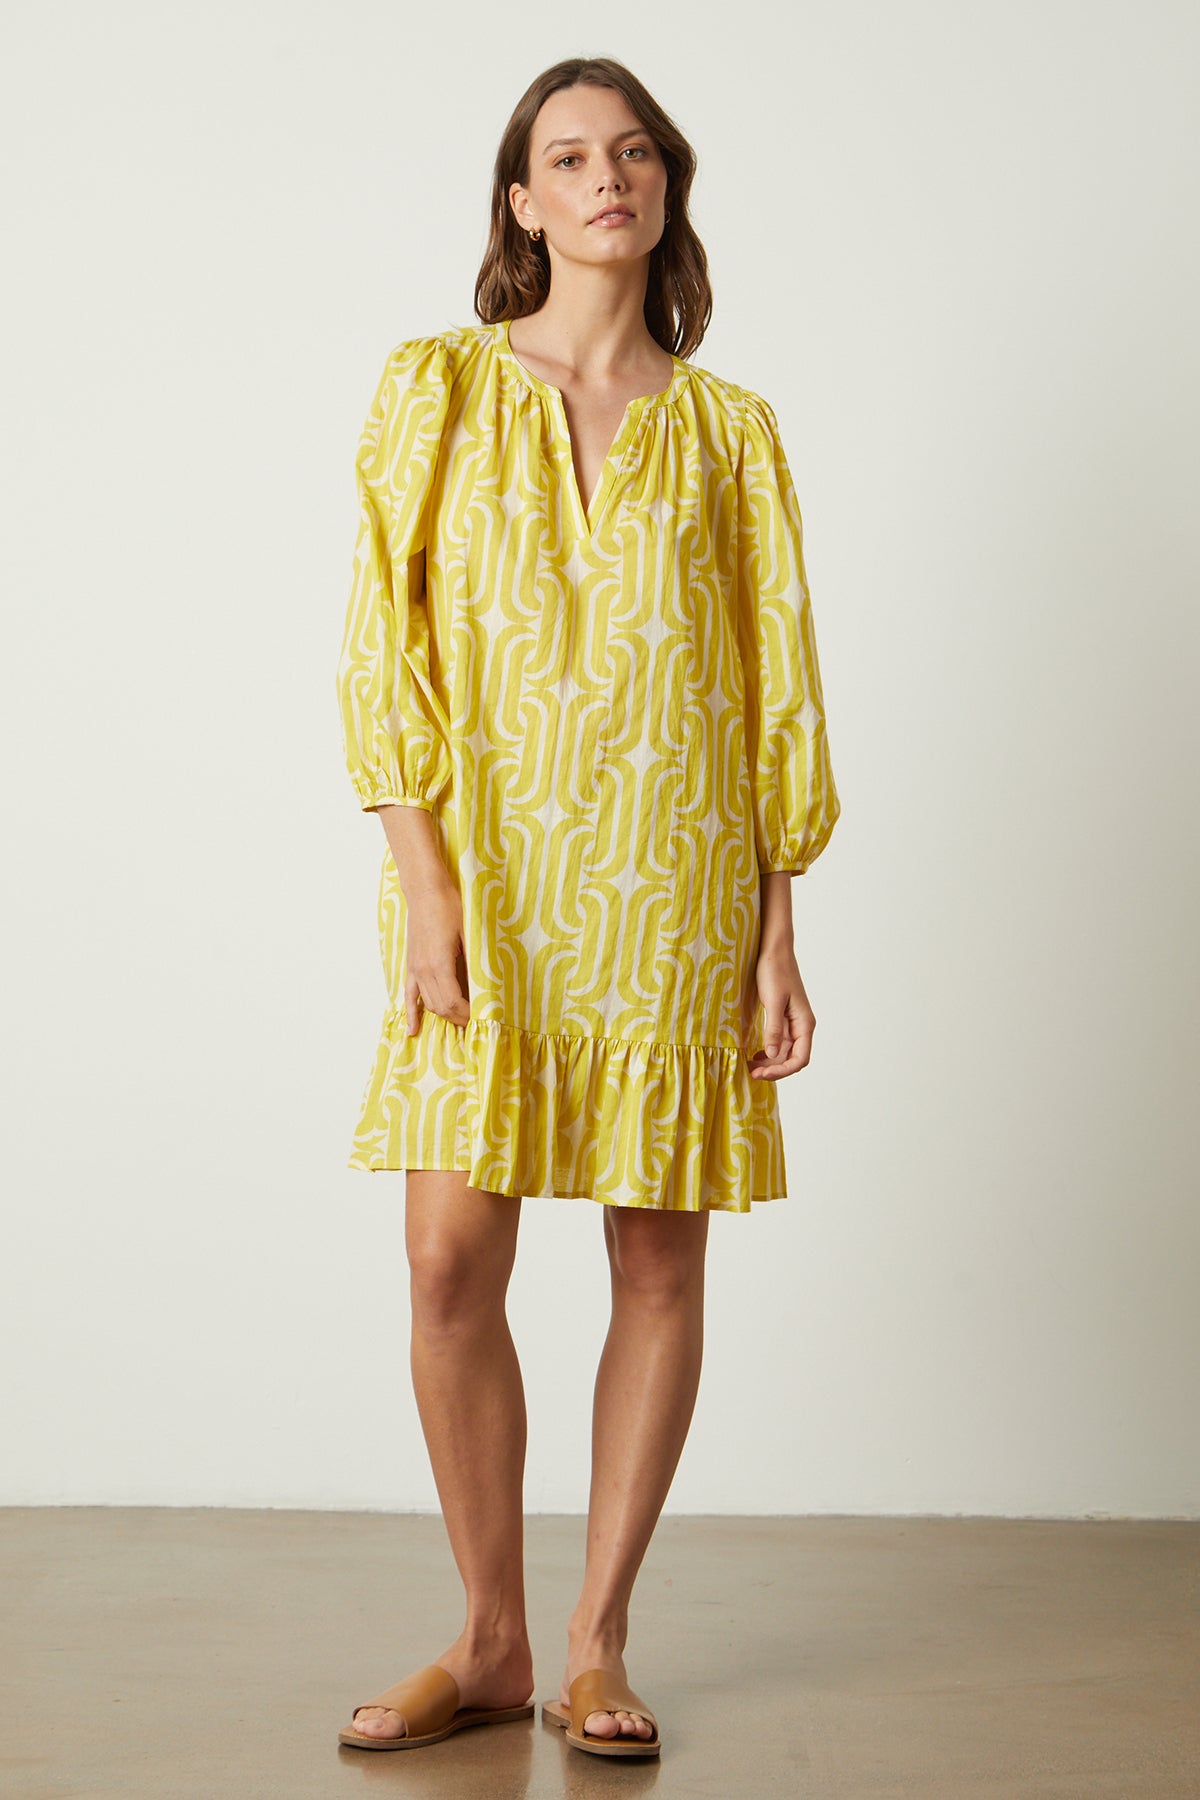 A woman wearing a yellow FELICITY PRINTED BOHO DRESS by Velvet by Graham & Spencer with a ruffled sleeve and a mod-inspired print.-26235561017537